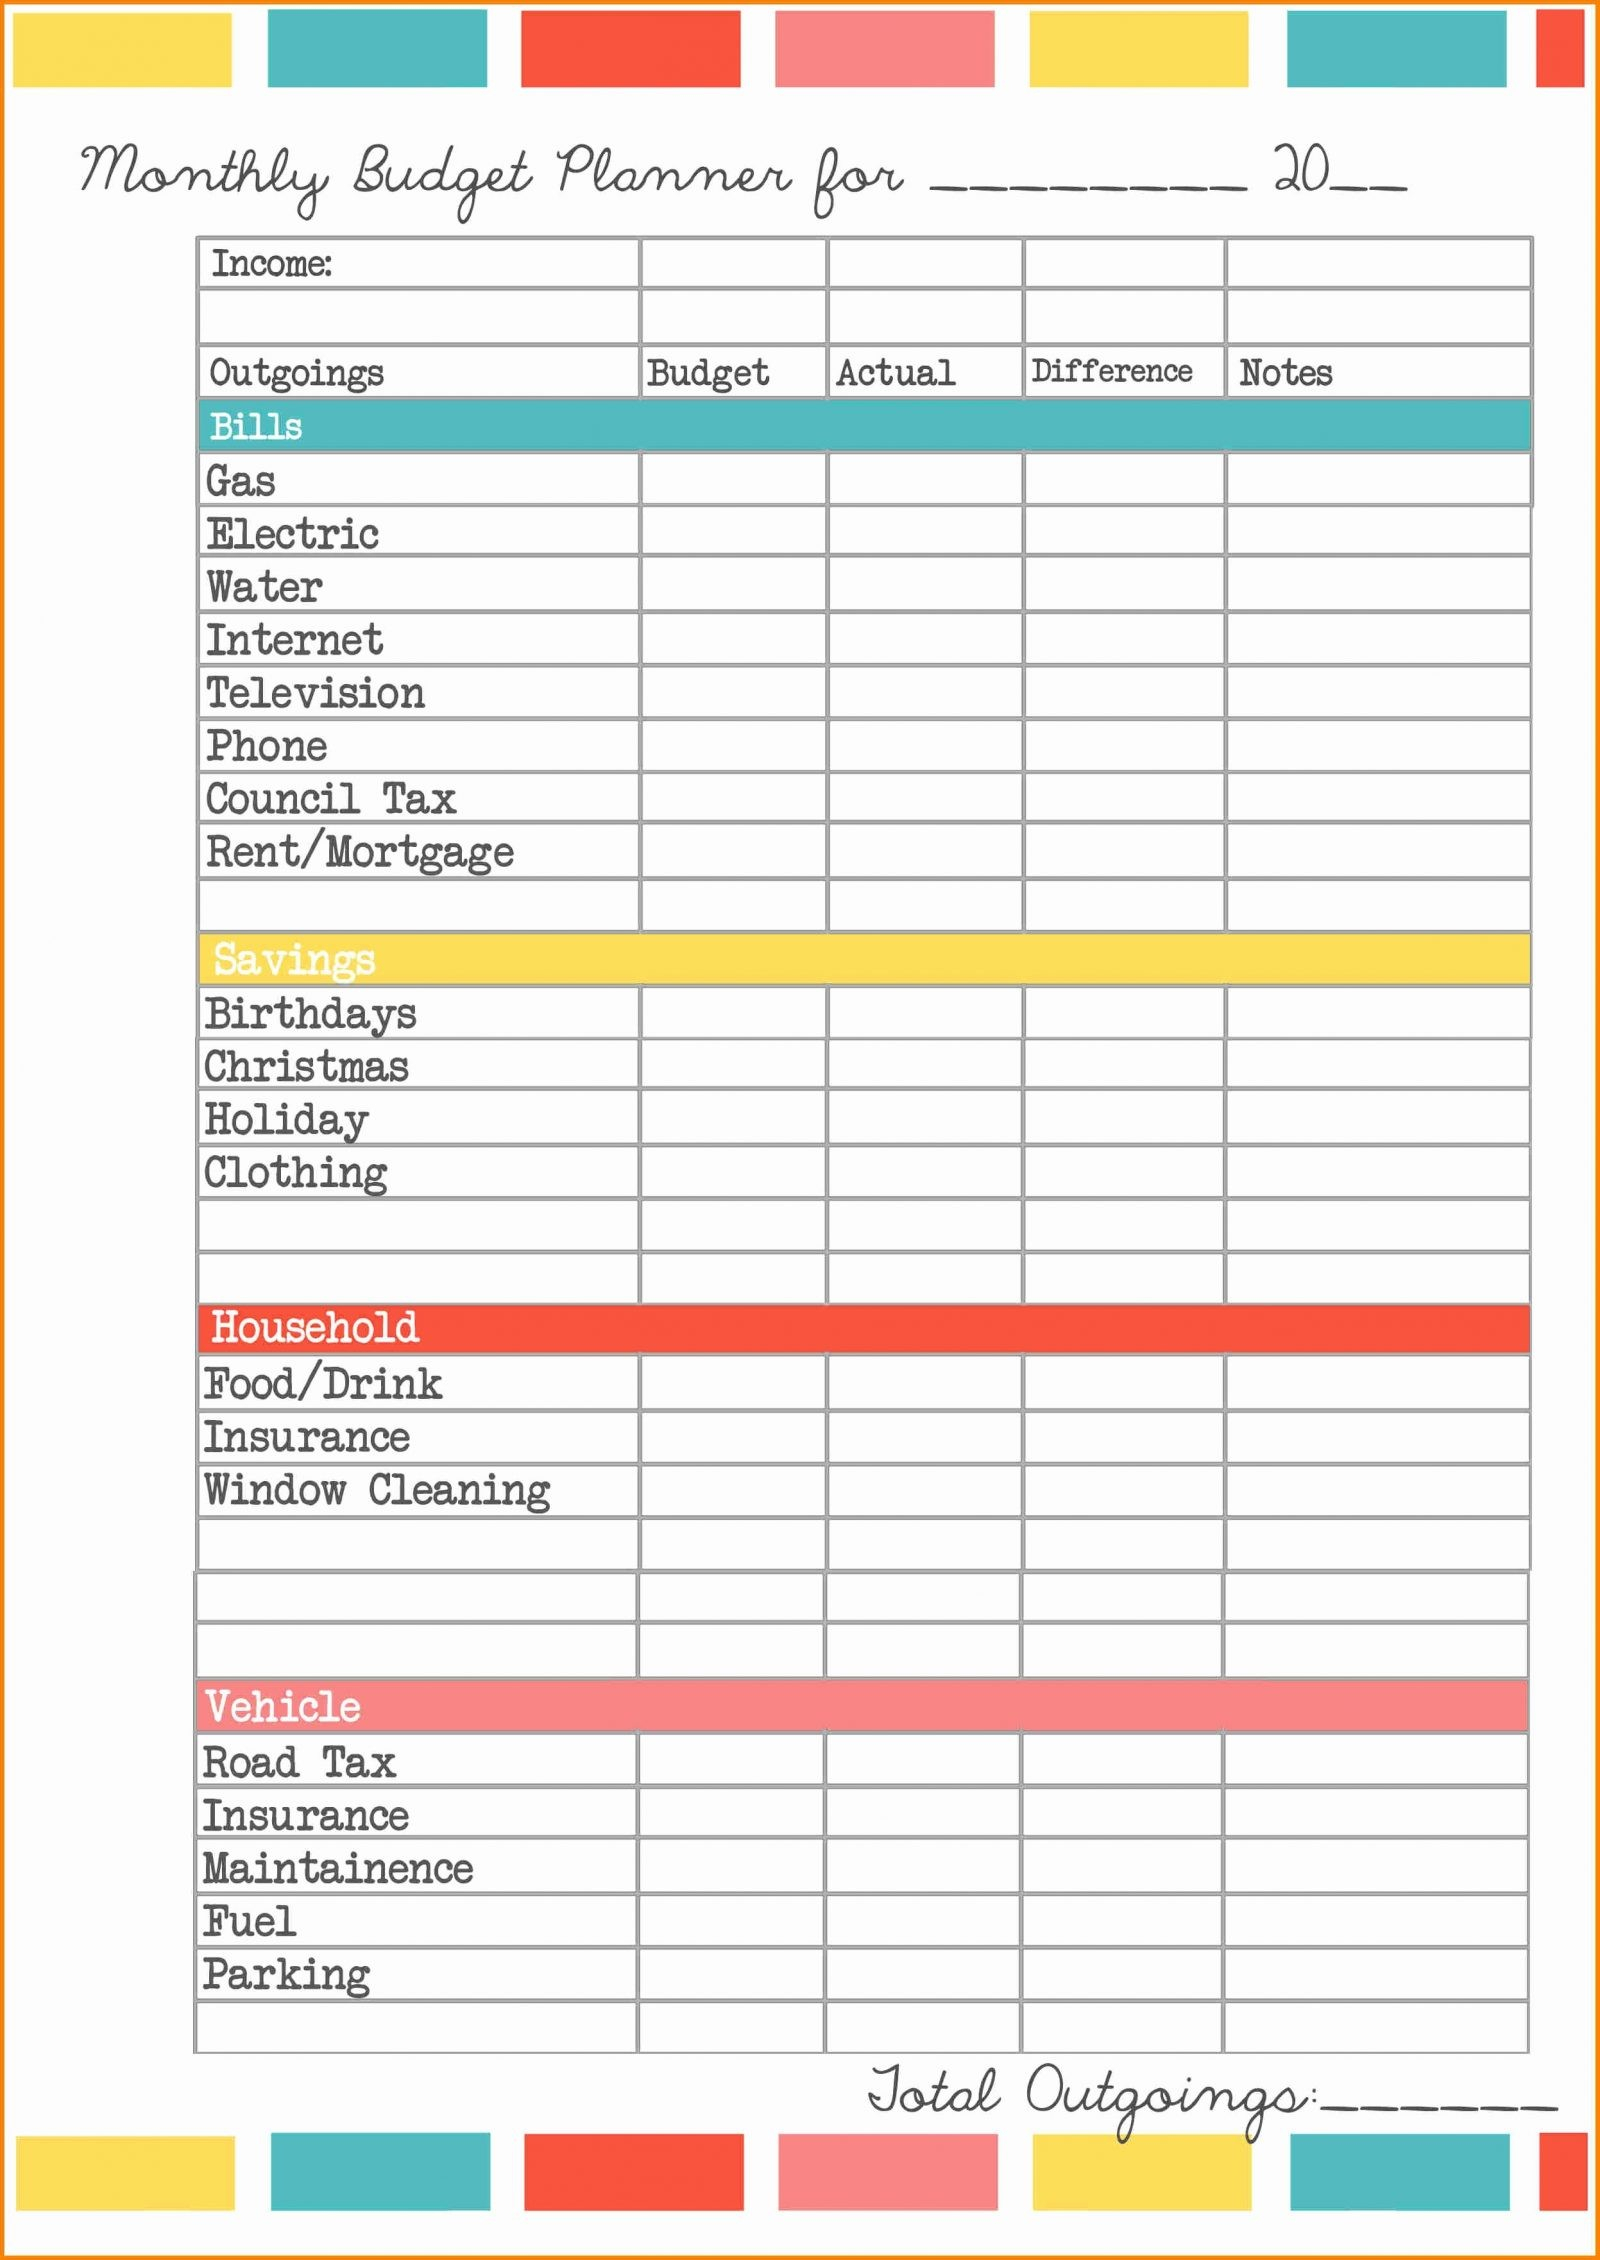 Home Budget Spreadsheet Uk With Home Budget Worksheet India Best Household Expenses Spreadsheet